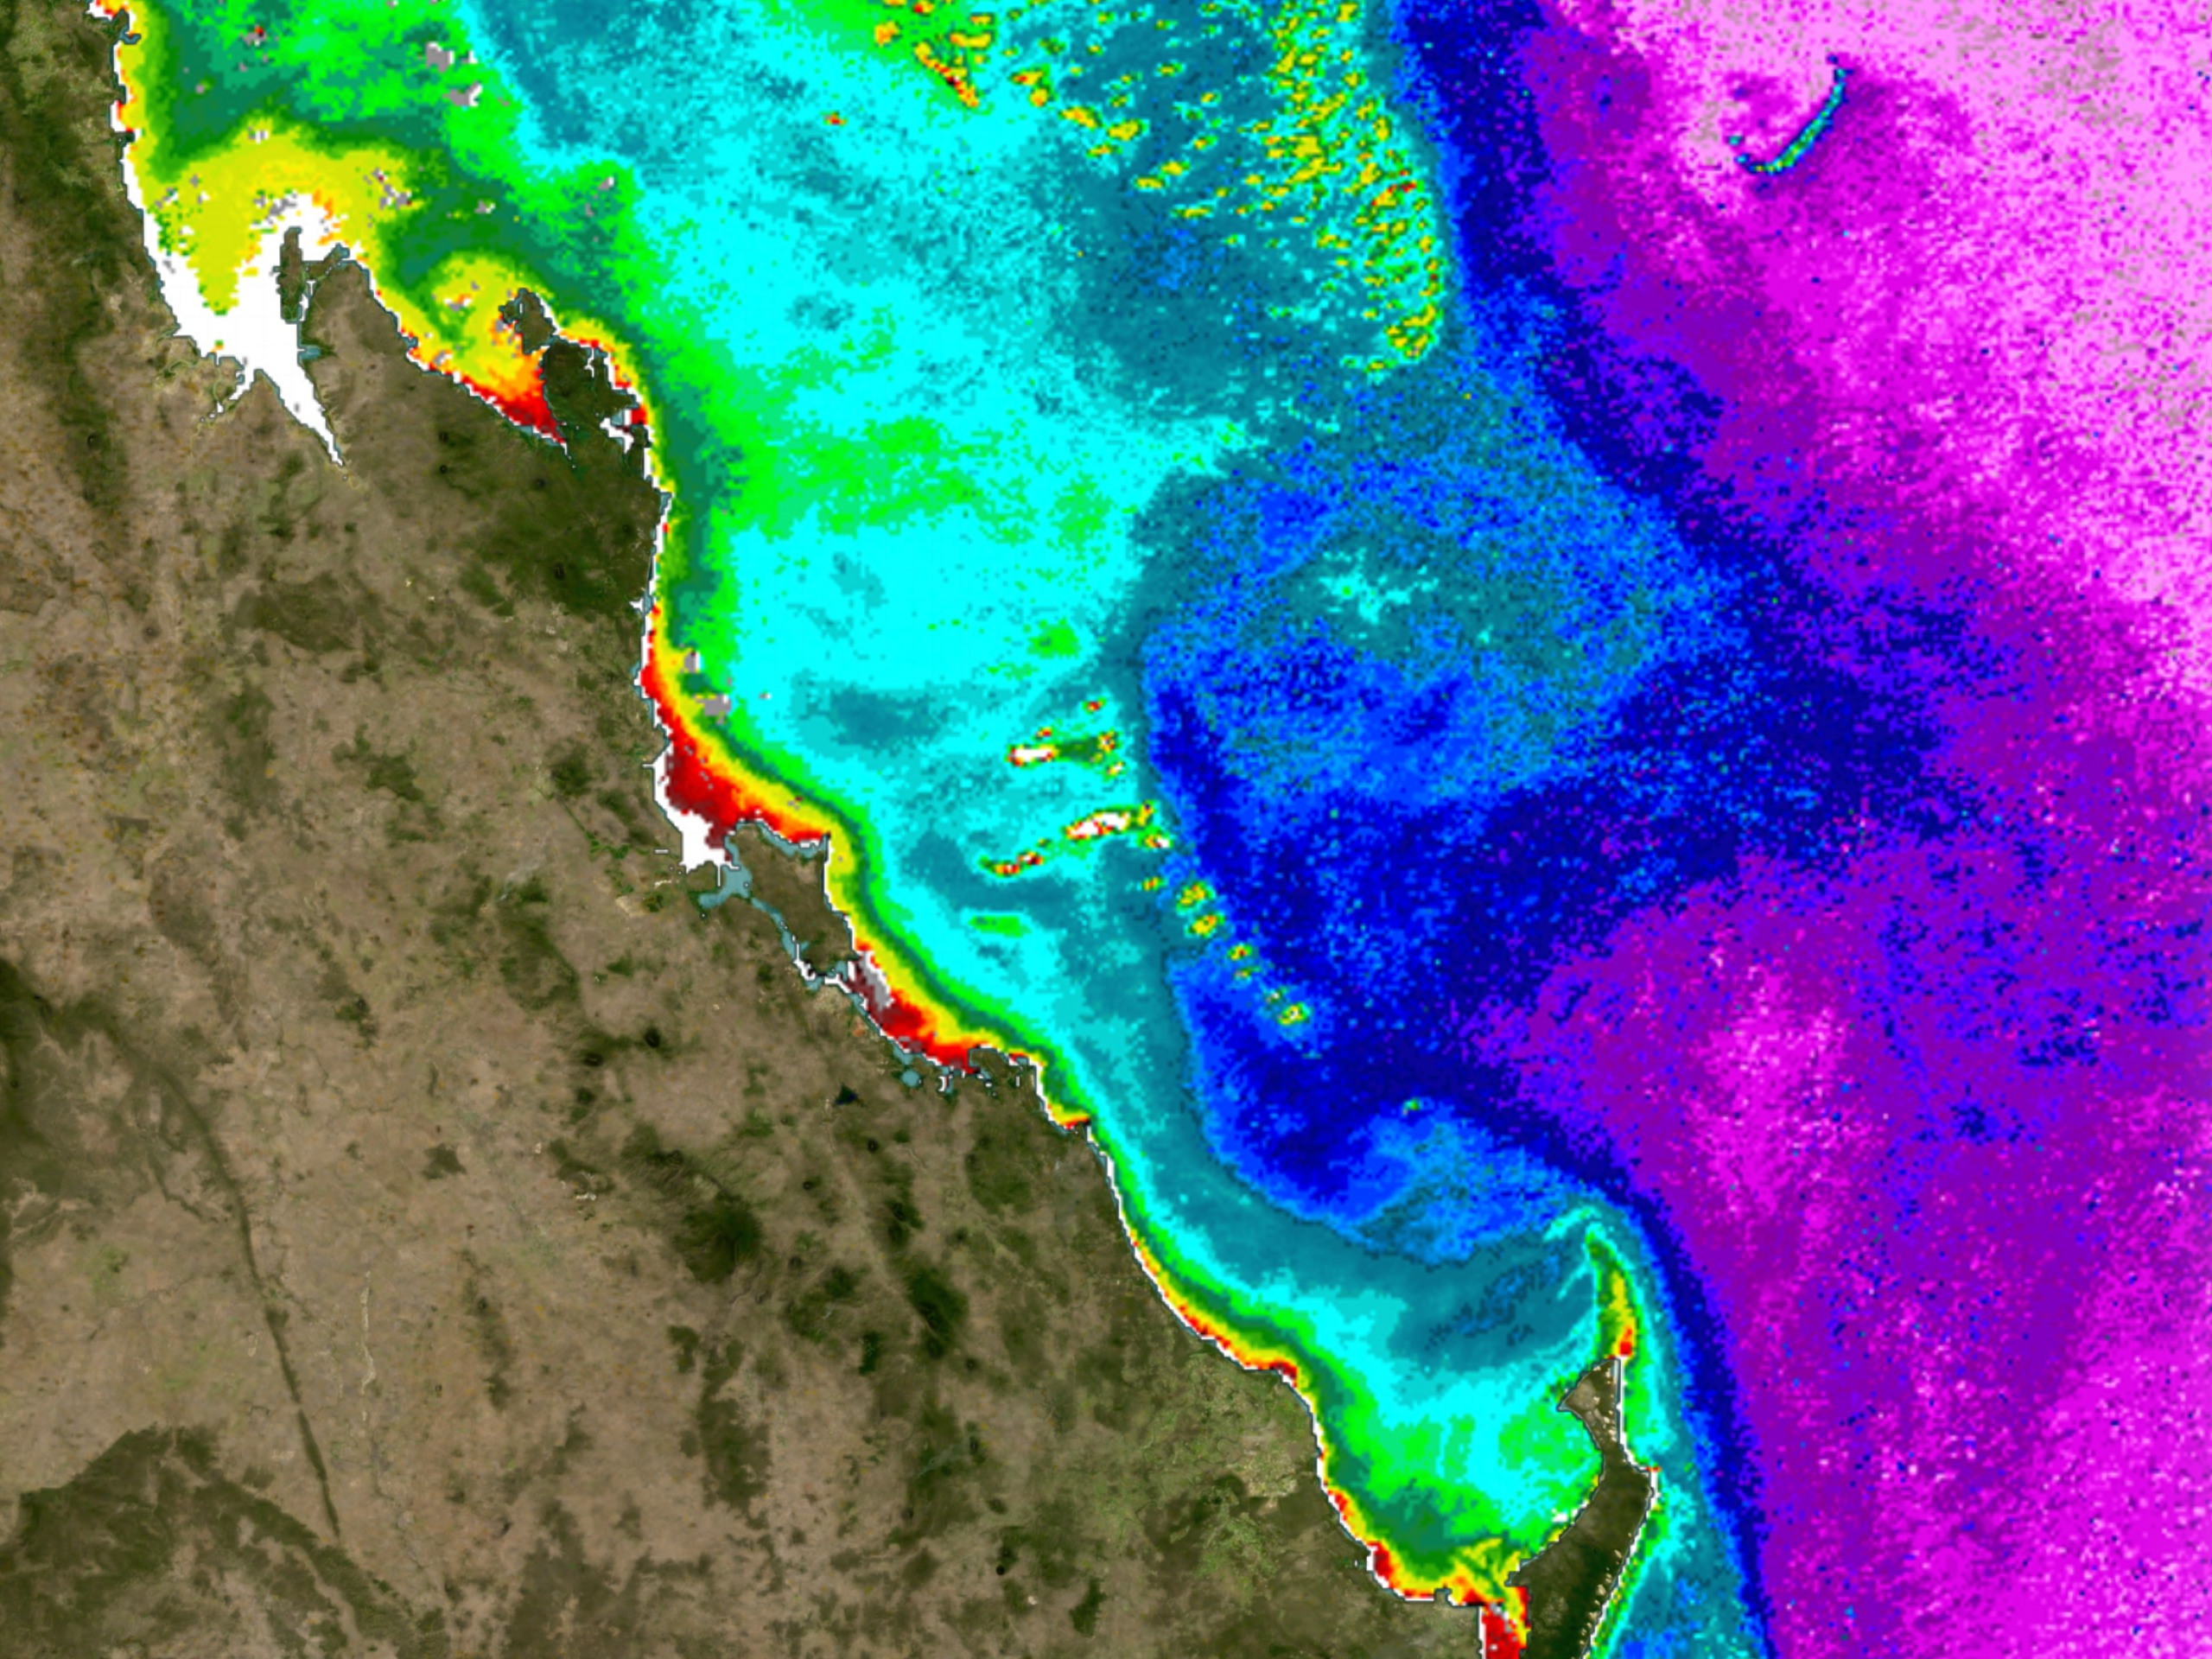 MODIS image for the southern Great Barrier Reef showing chlorophyll concentration showing oceanographic patterns.